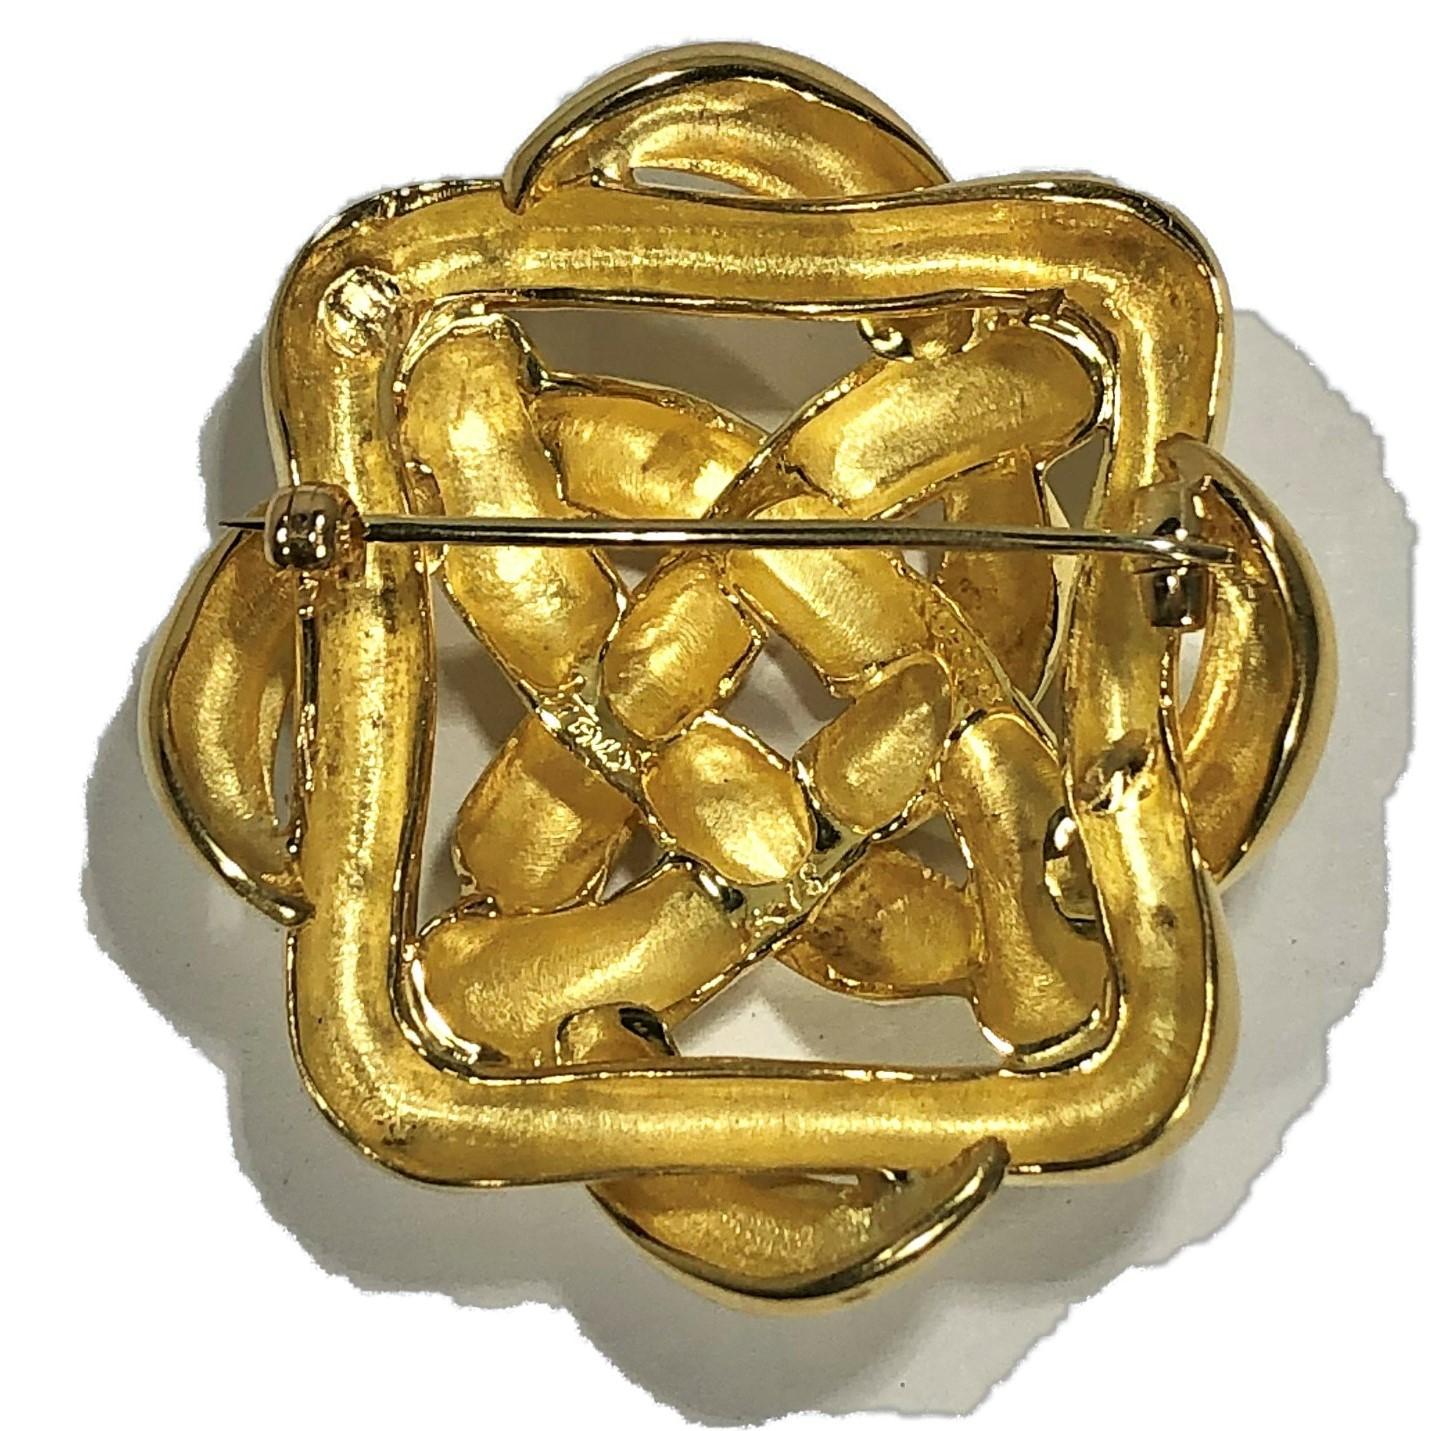 A classic 18K yellow gold, woven design brooch by Tiffany. The high polish,
geometric outline measures 1 3/4 inches long by 1 5/8 inches wide. Signed 
Tiffany 18K ITALY.  Gross weight 30.1 grams.